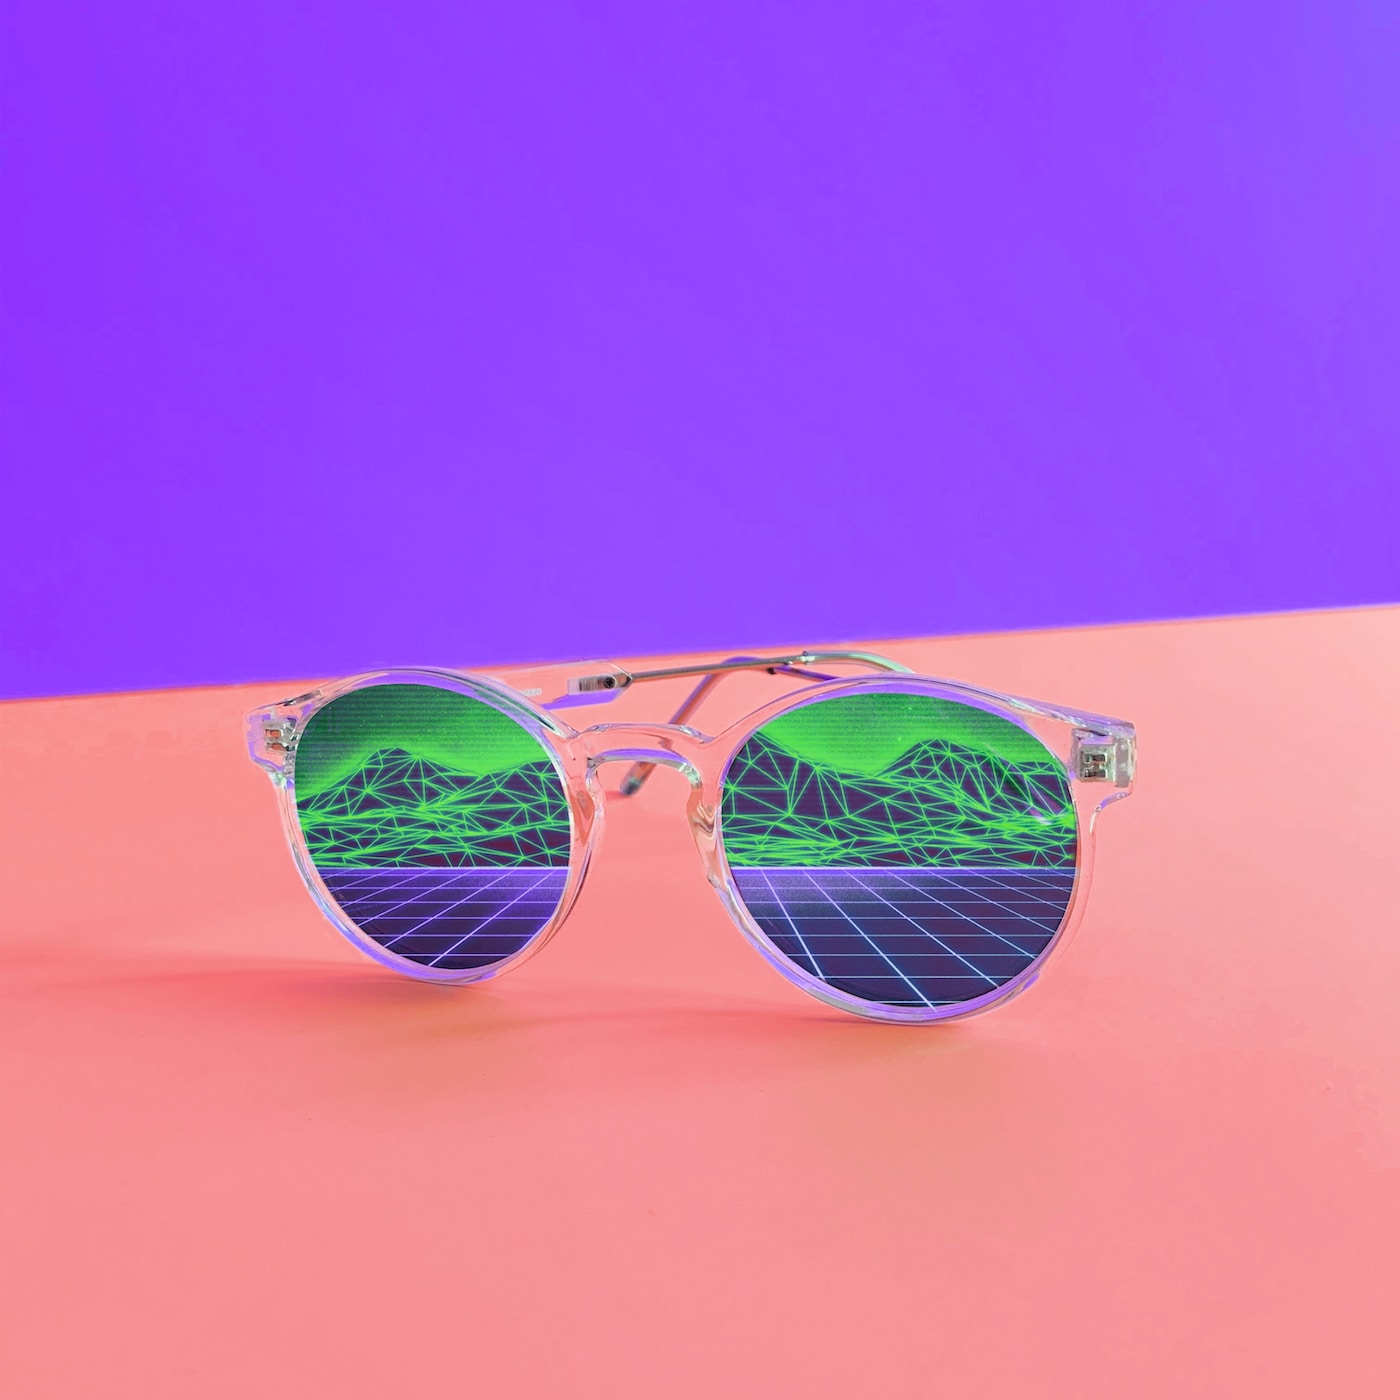 8 Decorative Sunglasses for You to Wear ...